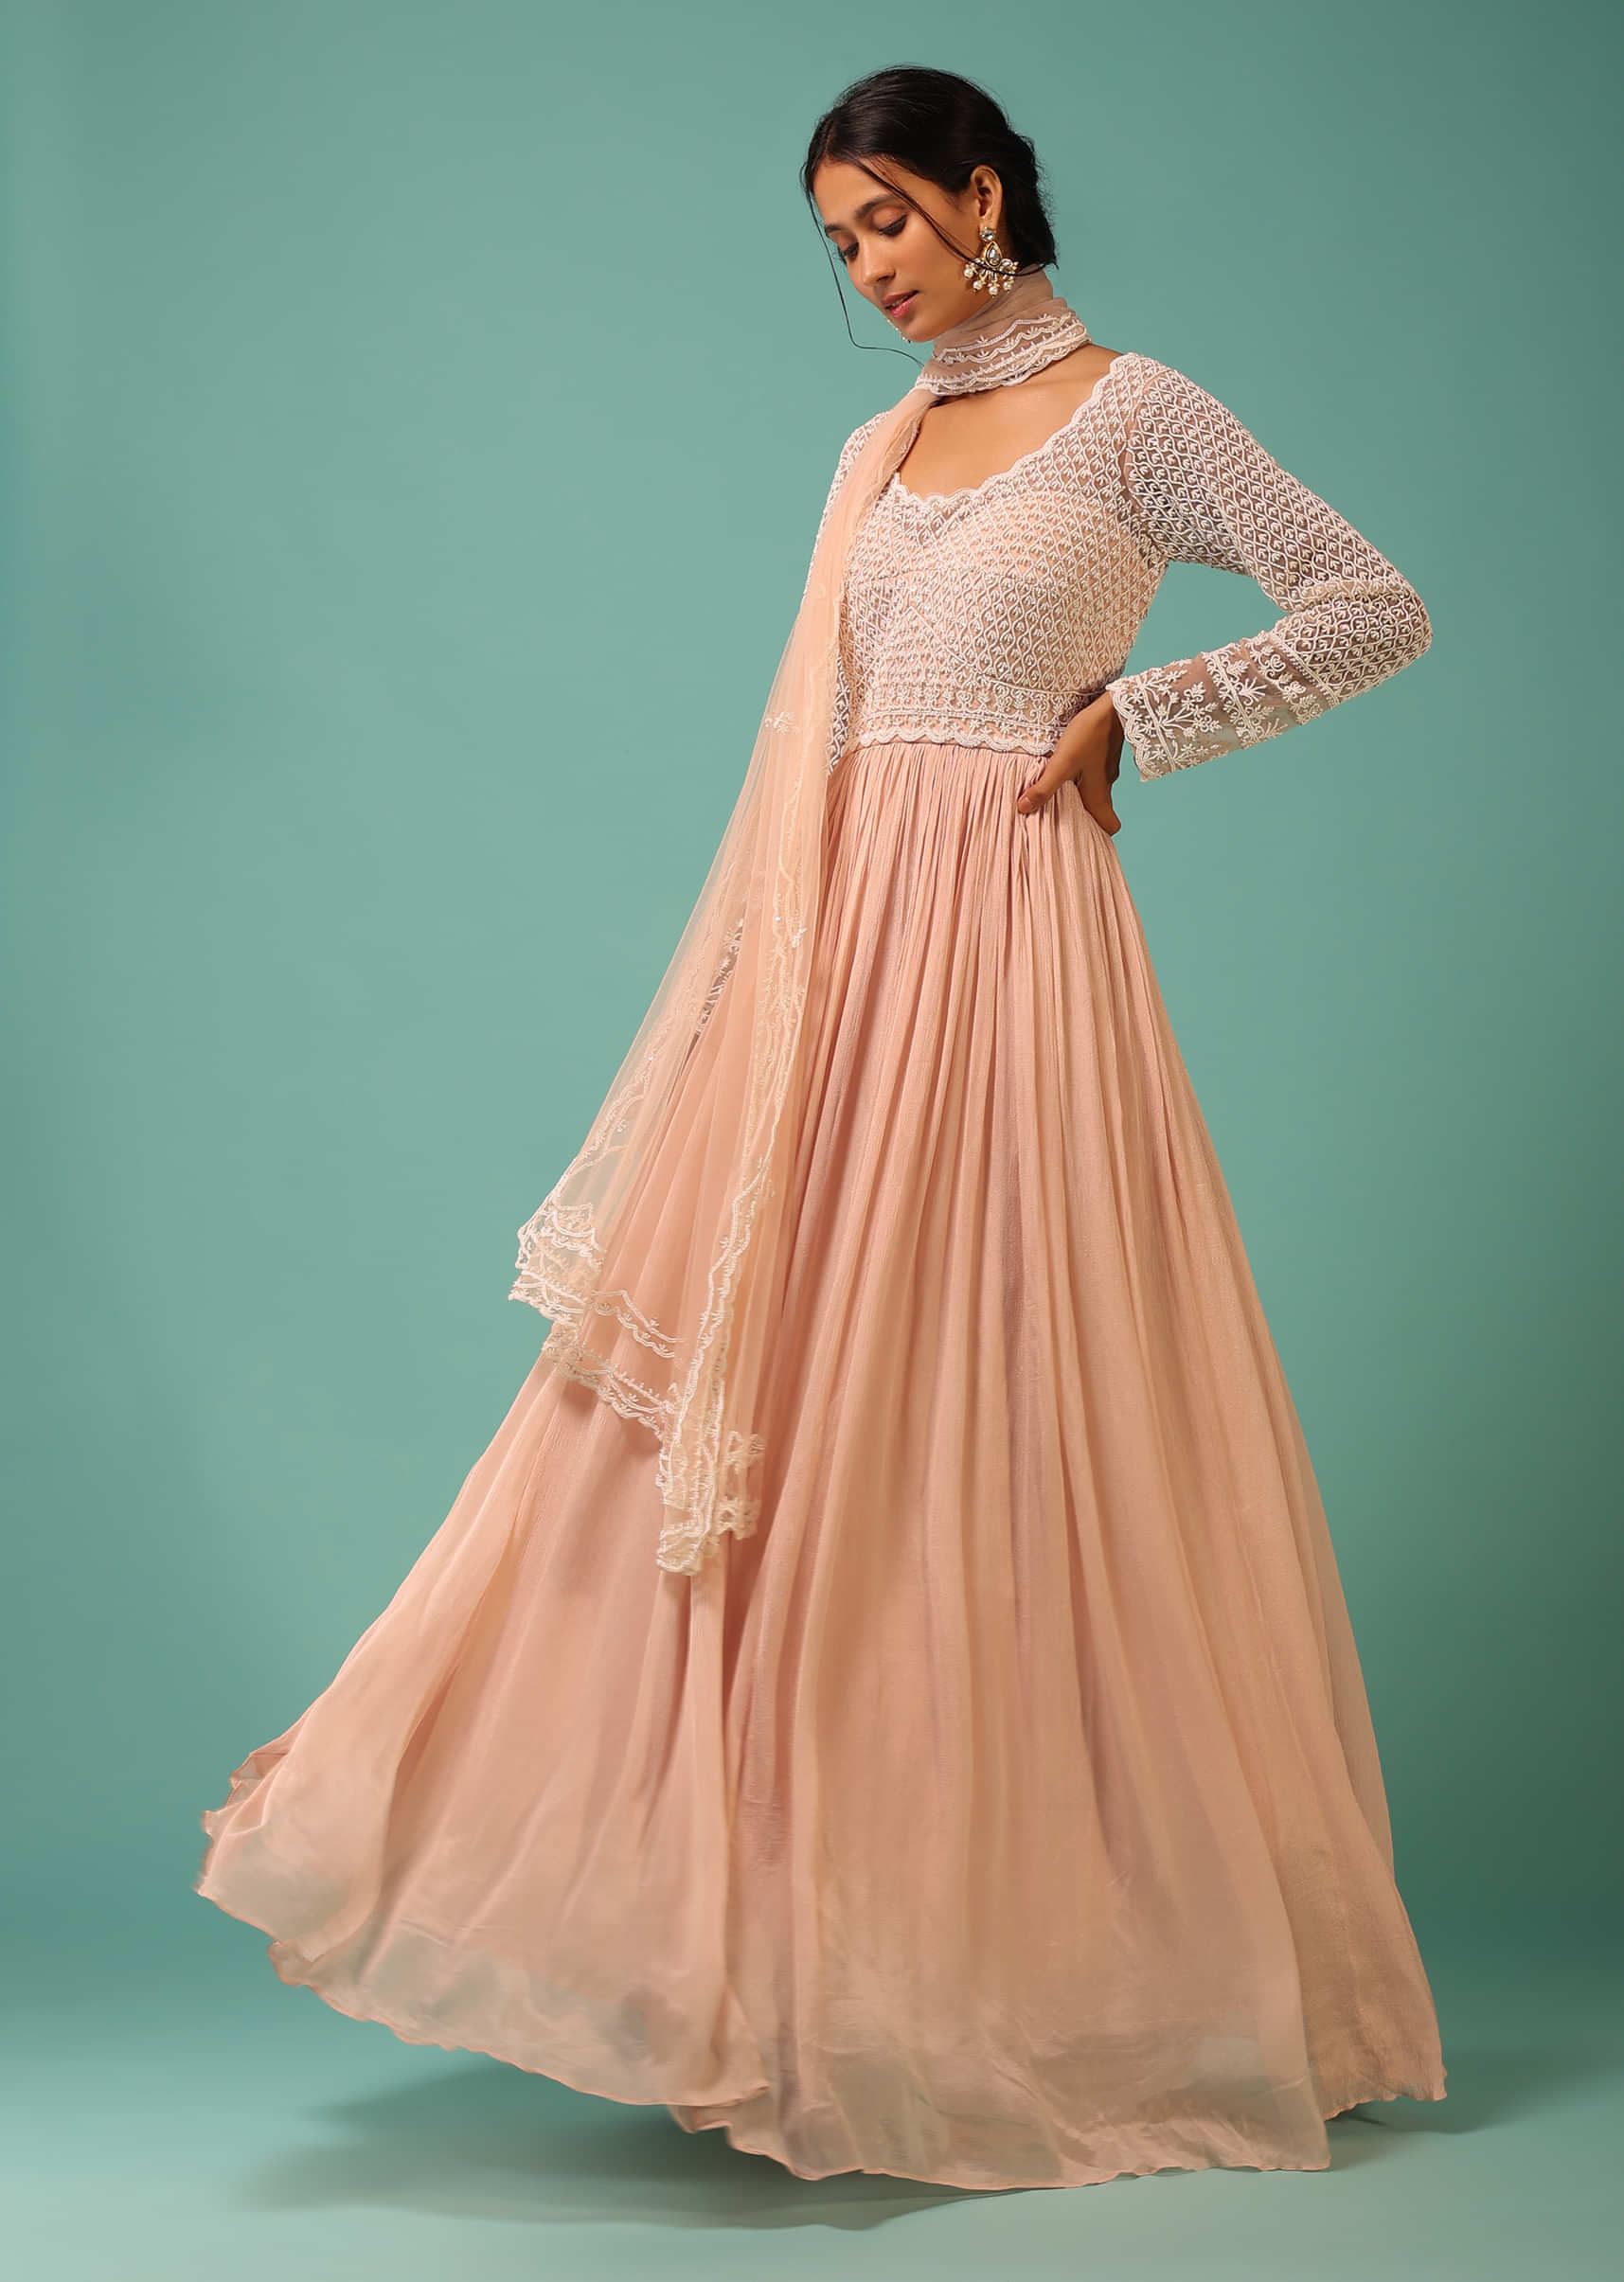 Powder Peach Anarkali Suit In Chiffon With Moti Embroidered Moroccan Design On The Bodice